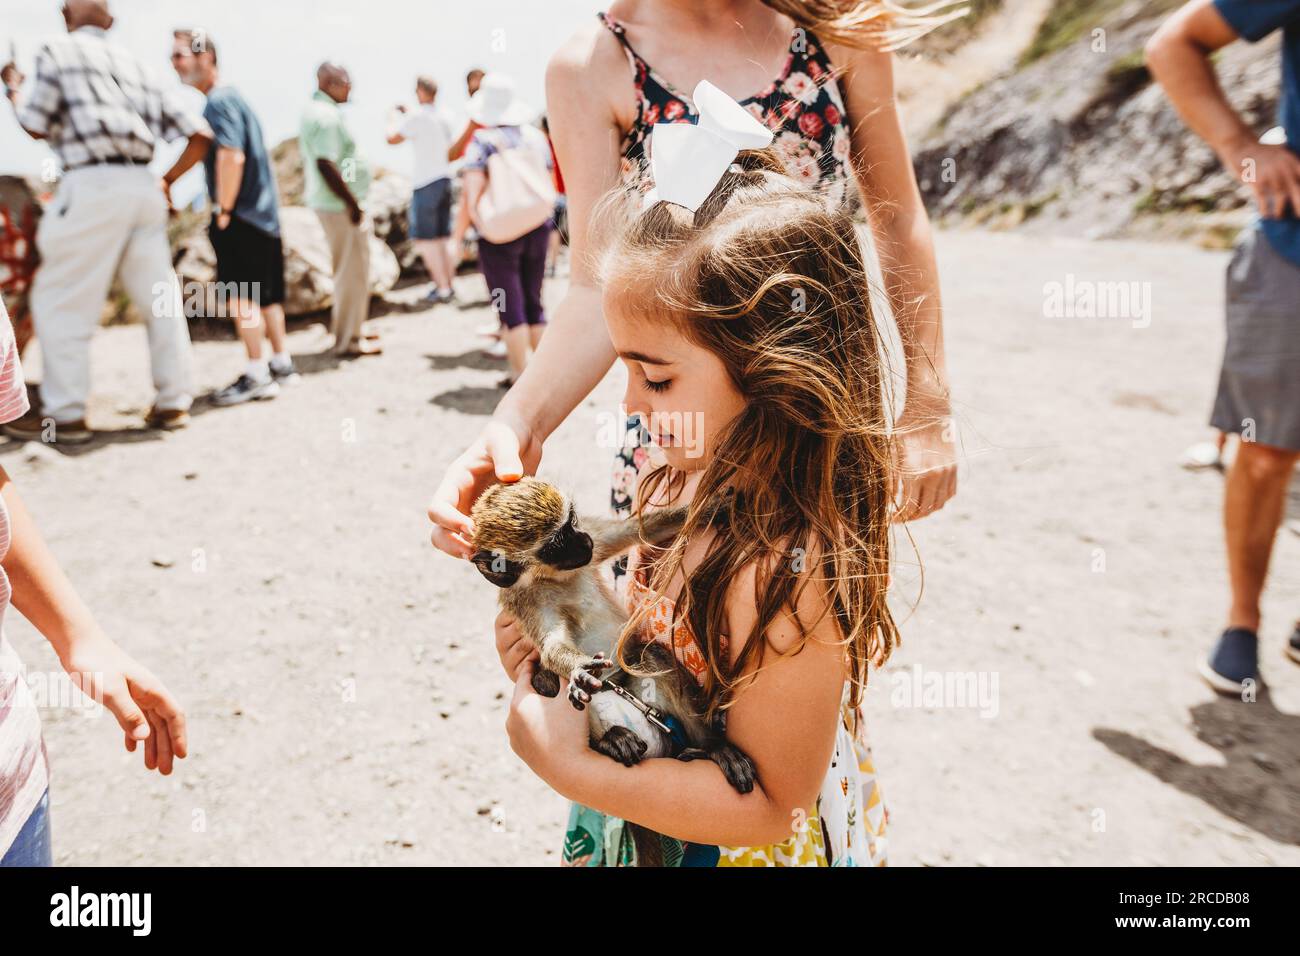 Young girl plays with monkey at tourist spot on island of St Kitts Stock Photo